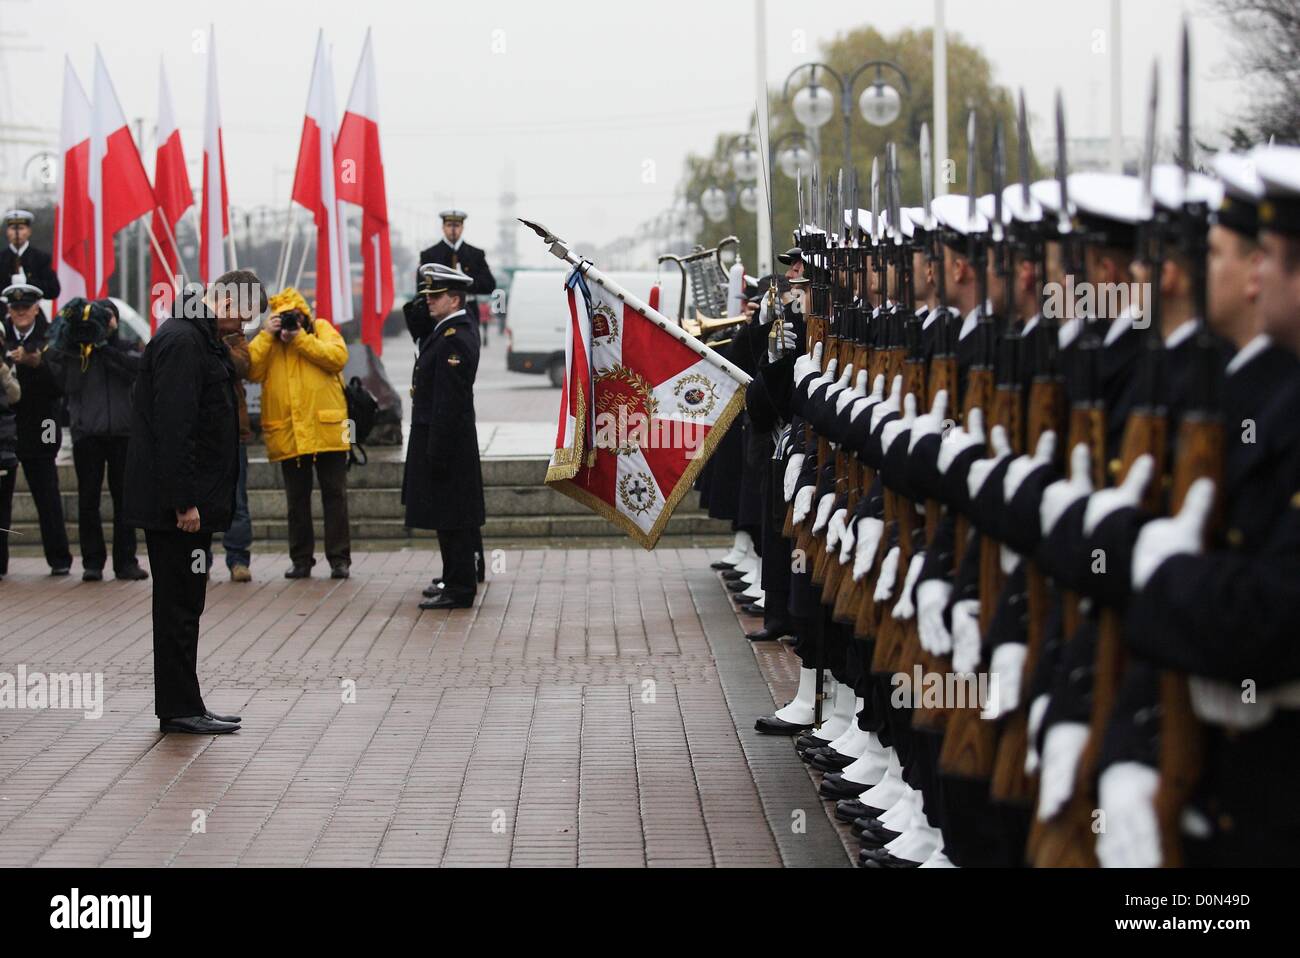 Gdynia, Poland 28th, November 2012  94th anniversary of Polish Navy reneval by the Marshal Jozef Pilsudski in 1918. Minister of Defence Tomasz Siemoniak (C) takes part in the ceremony in front of Polish Navy Sailor Plaque in Gdynia. Stock Photo